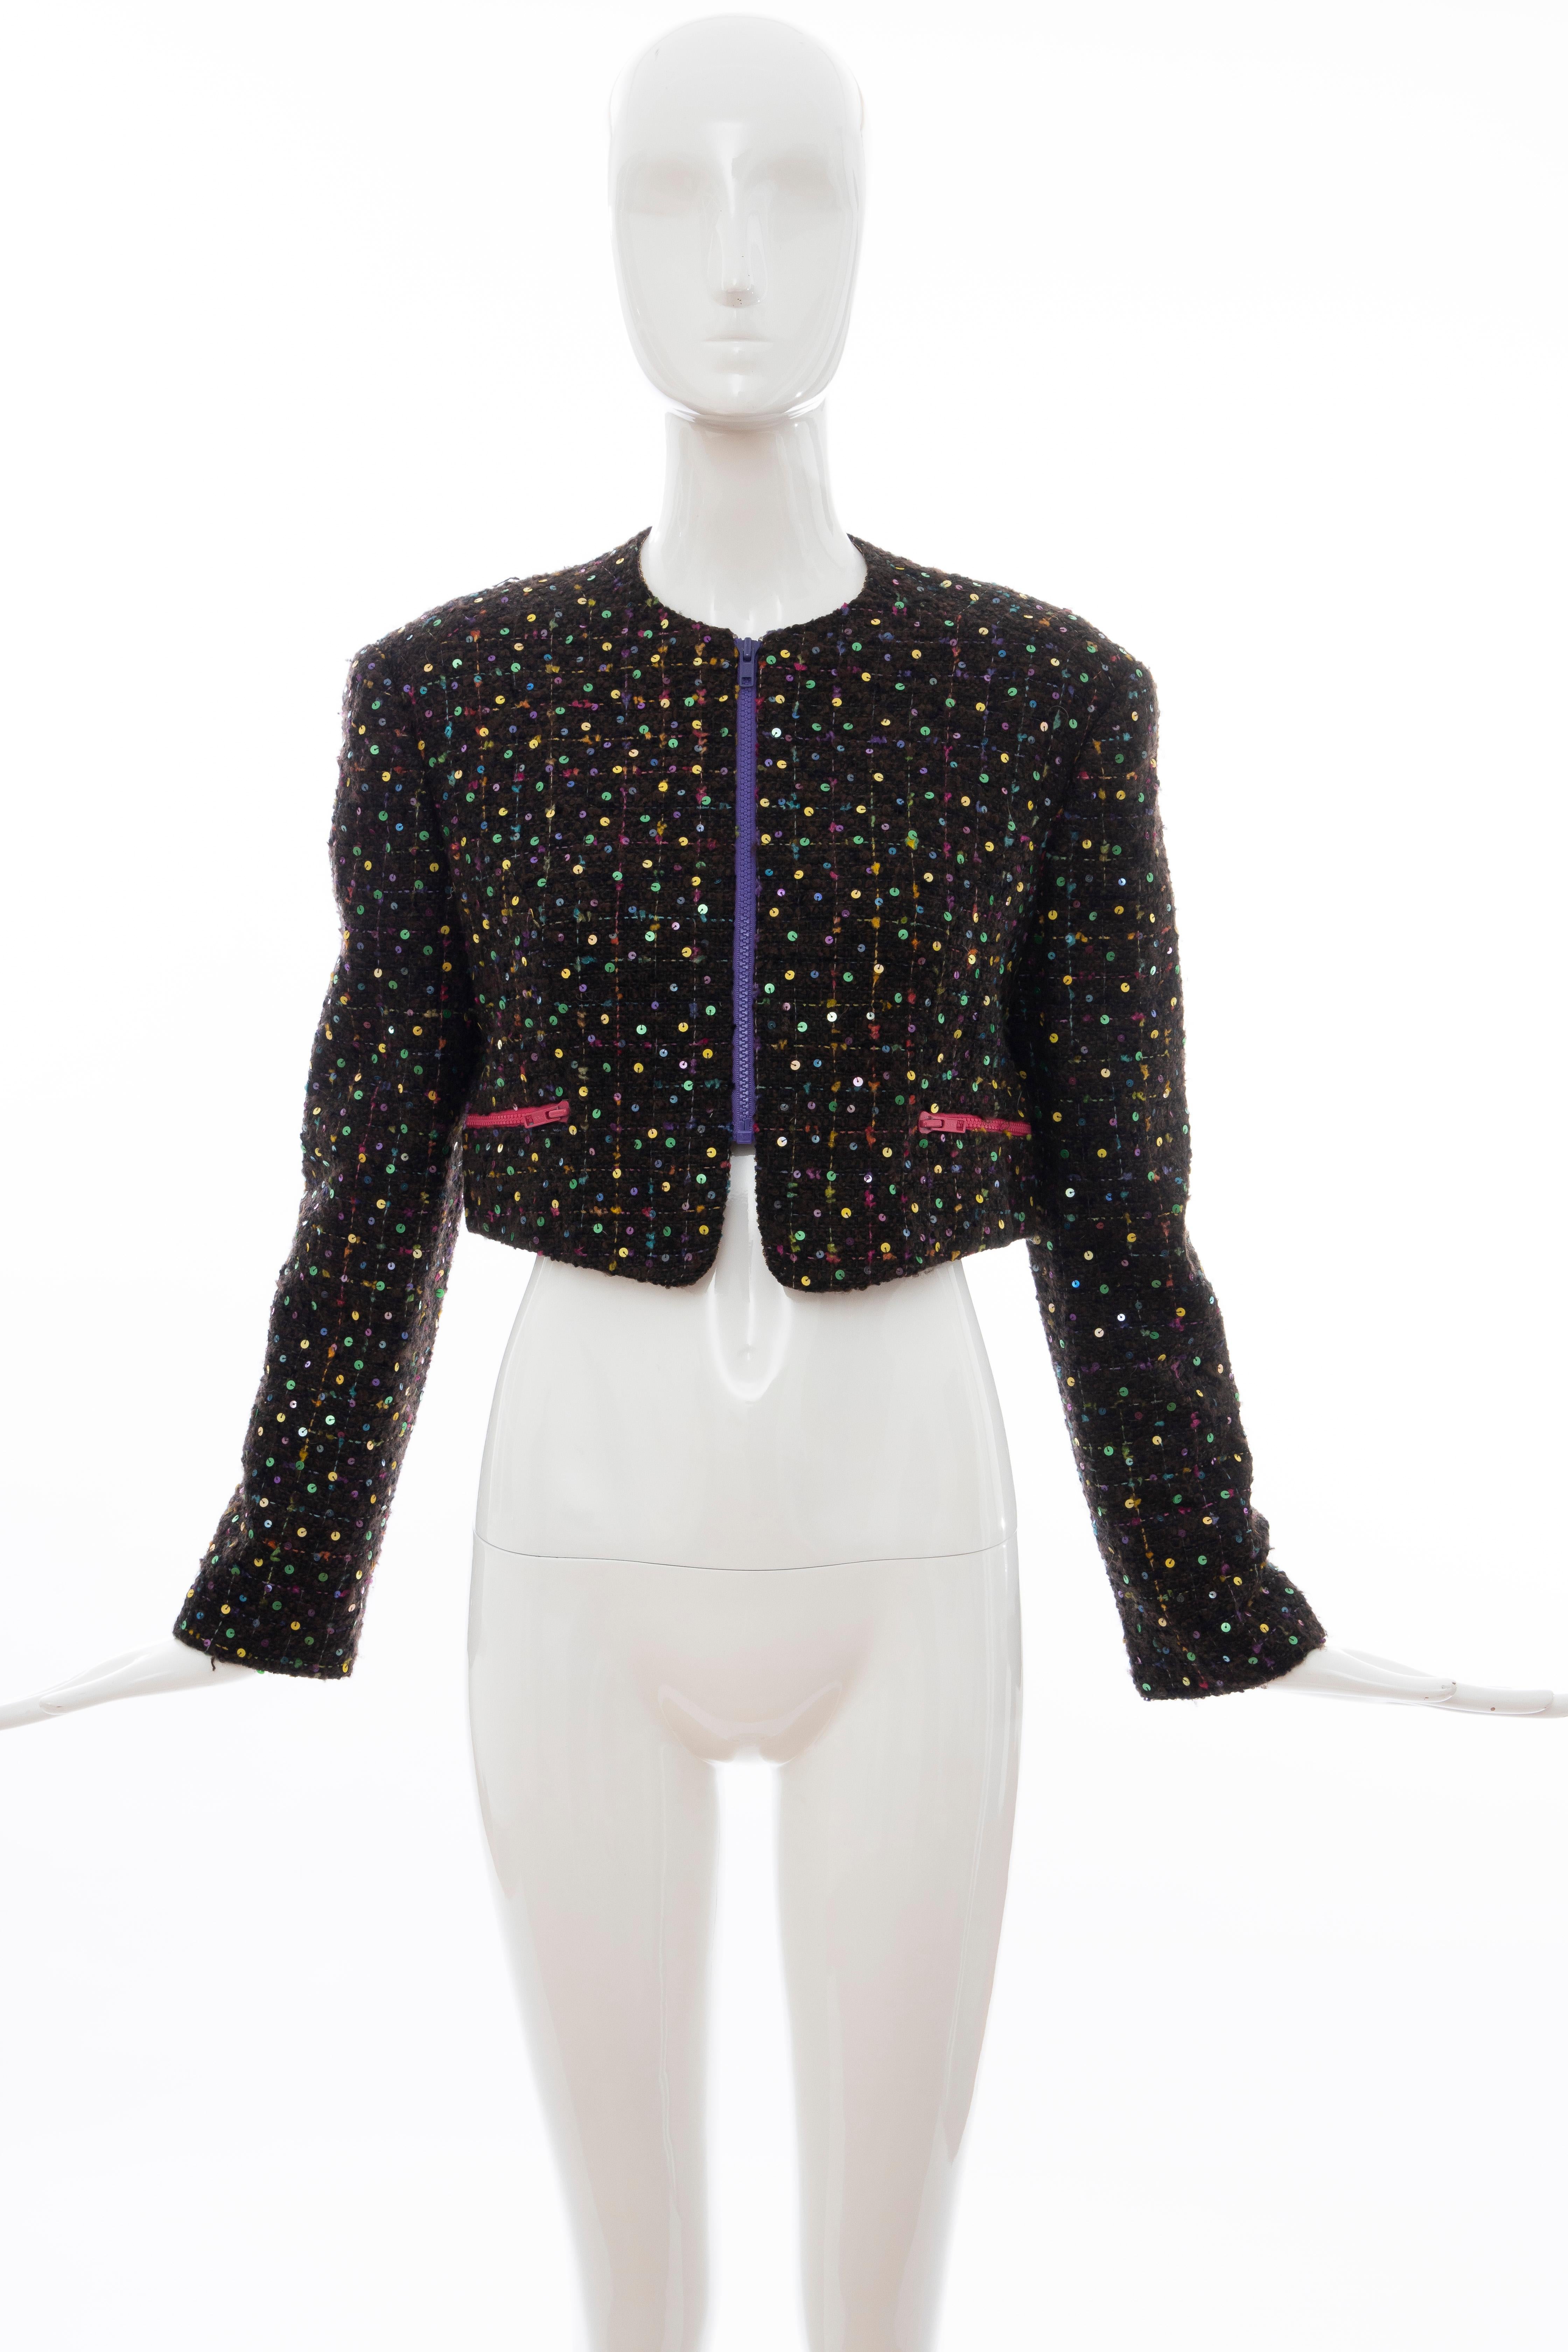 Geoffrey Beene, Spring 1989 tweed zip front long sleeve polychrome sequined bolero jacket, dual front pockets with hot pink zipper closure and silk yellow with black polka-dots lining, fully lined with silk lavender and black polka-dots.

No Size